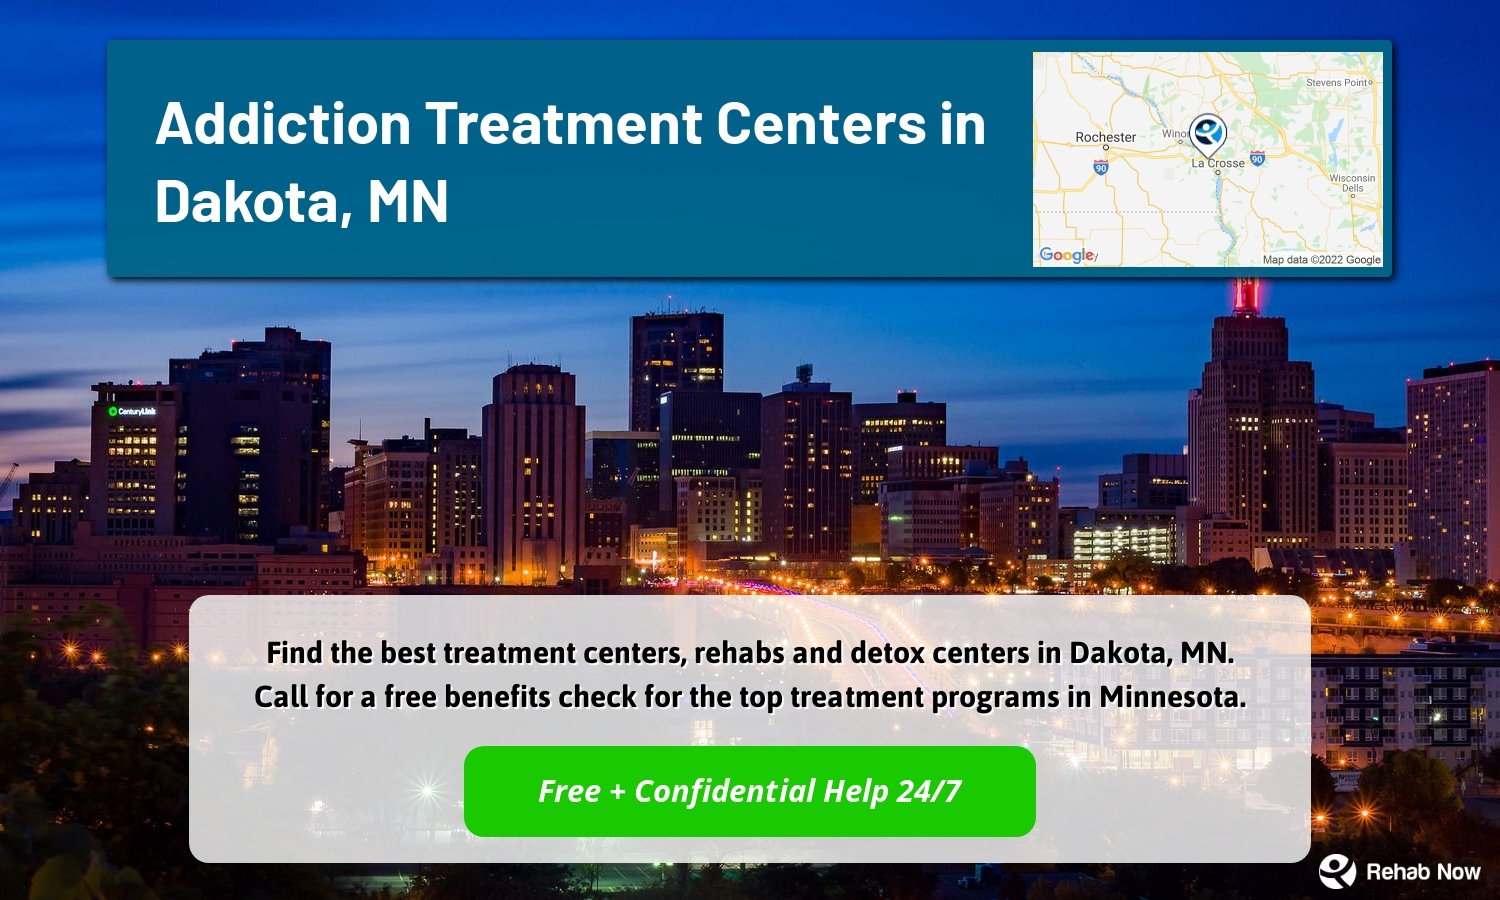 Find the best treatment centers, rehabs and detox centers in Dakota, MN. Call for a free benefits check for the top treatment programs in Minnesota.